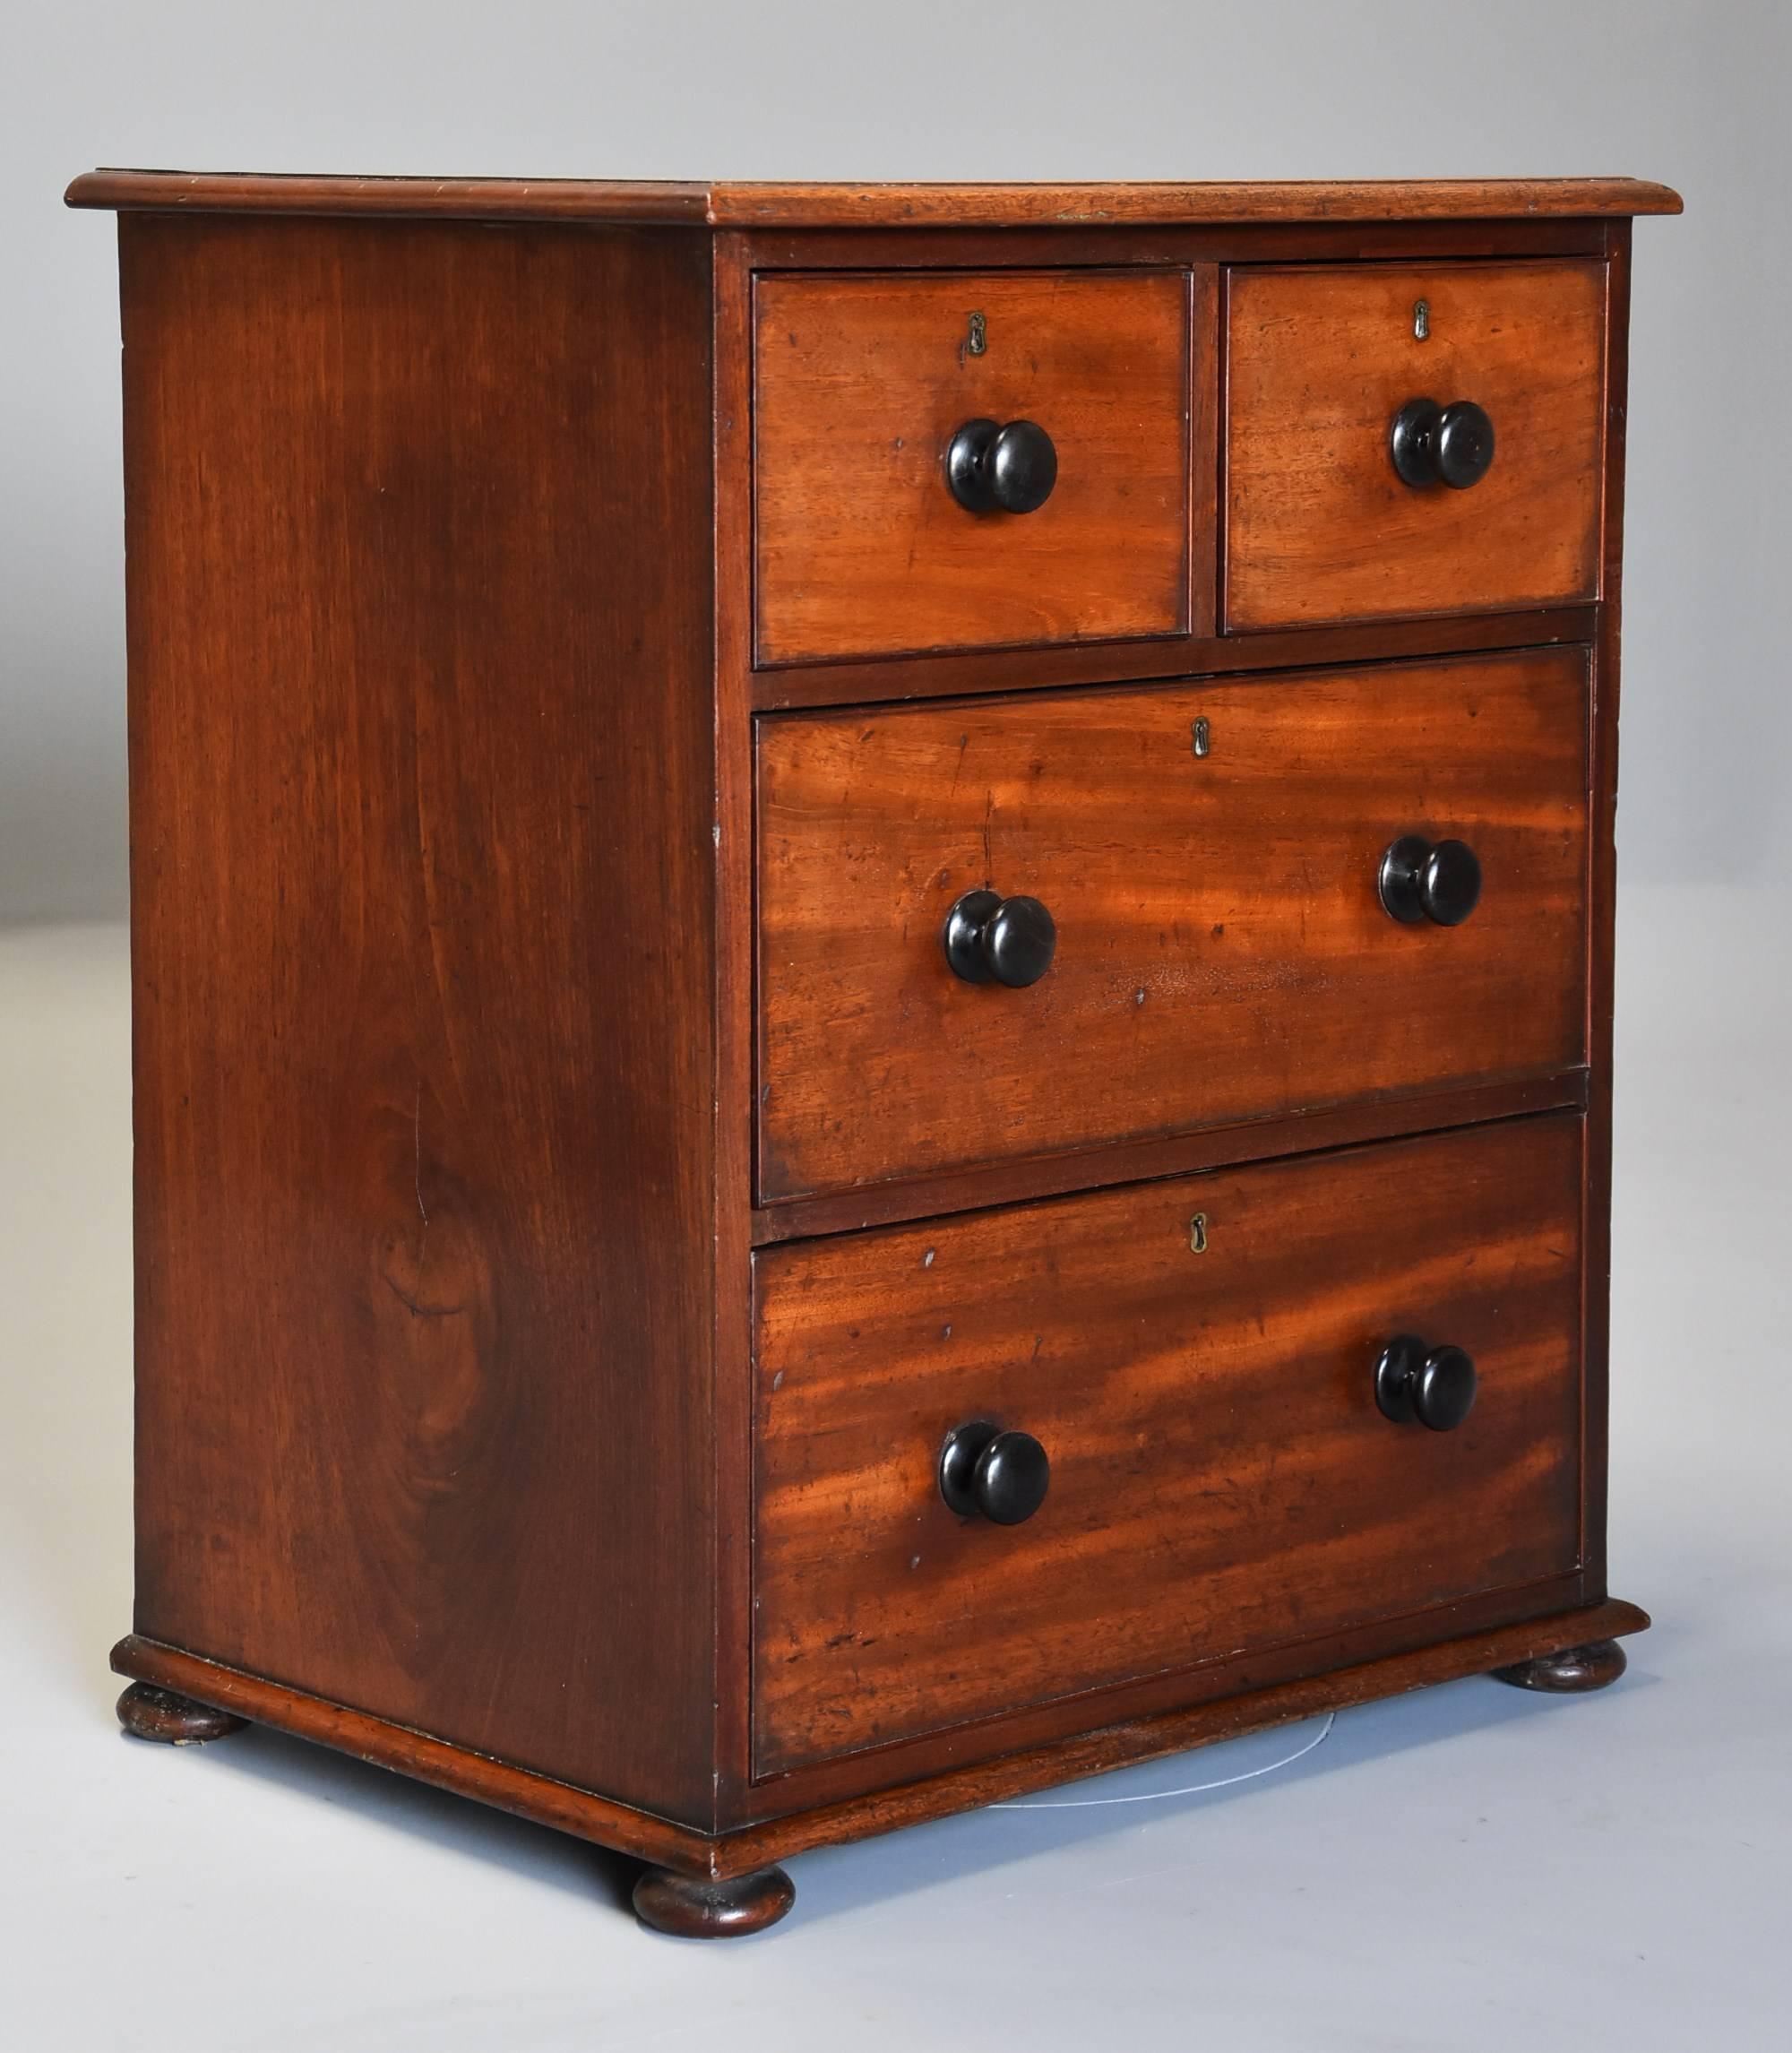 English Small Mid-19th Century Mahogany Chest of Drawers with Superb Patina For Sale